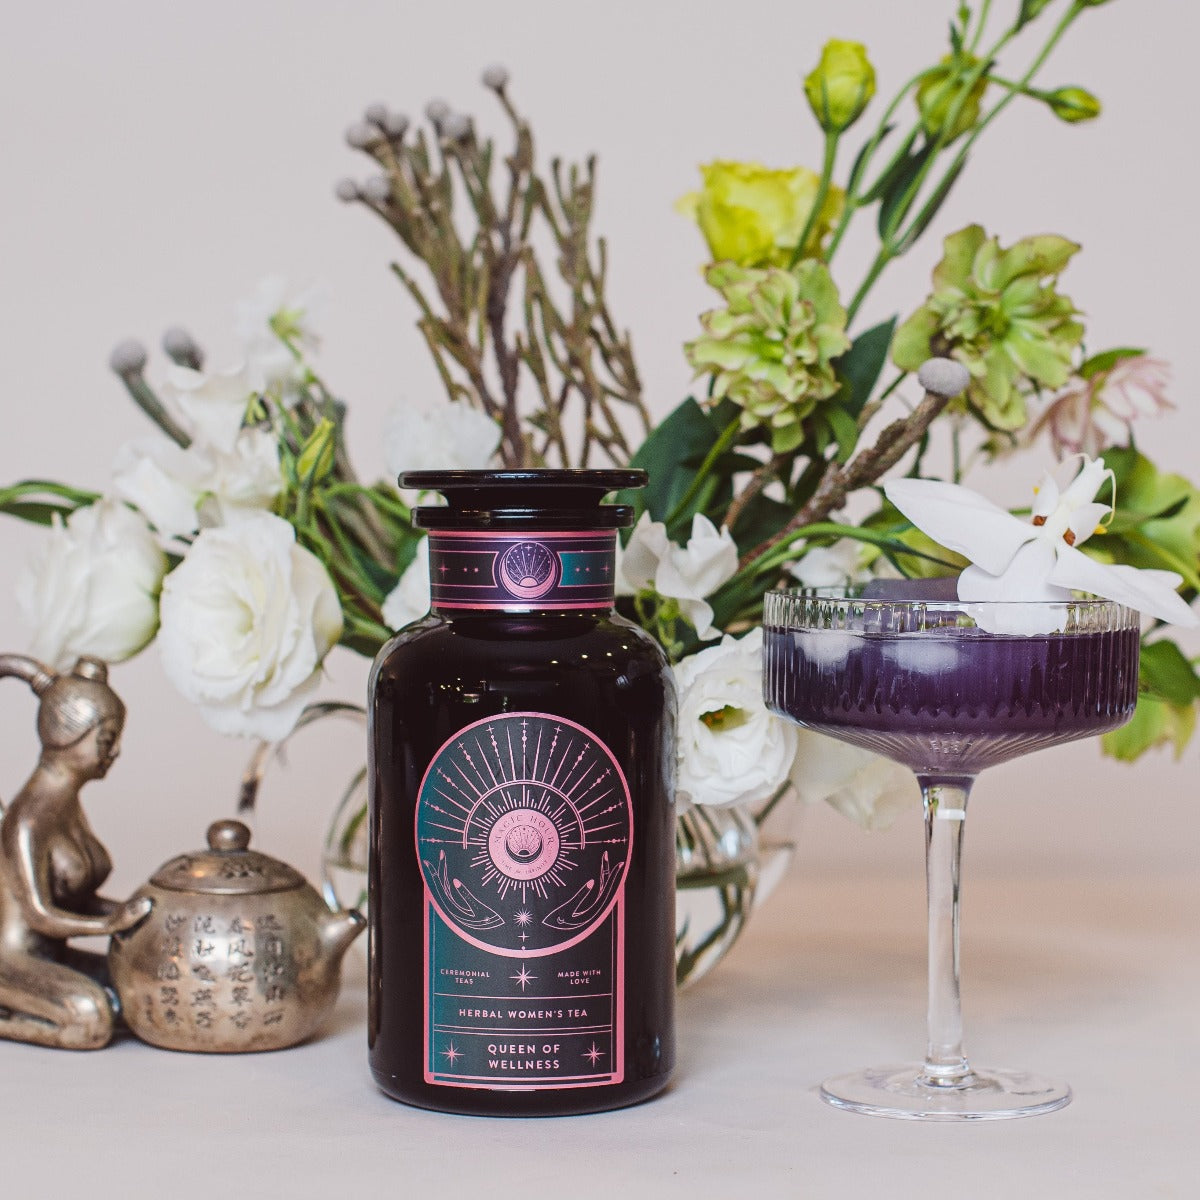 A glass bottle labeled &quot;Magic Hour Queen of Wellness: Women&#39;s Hormone Balancing Tea for PMS, Healthy Cycles &amp; Menopause&quot; with a dark brownish-purple liquid stands next to a glass goblet of the same liquid garnished with a white flower. In the background are white and green flowers, a small statue, and a teapot alongside an assortment of loose leaf tea from Magic Hour.